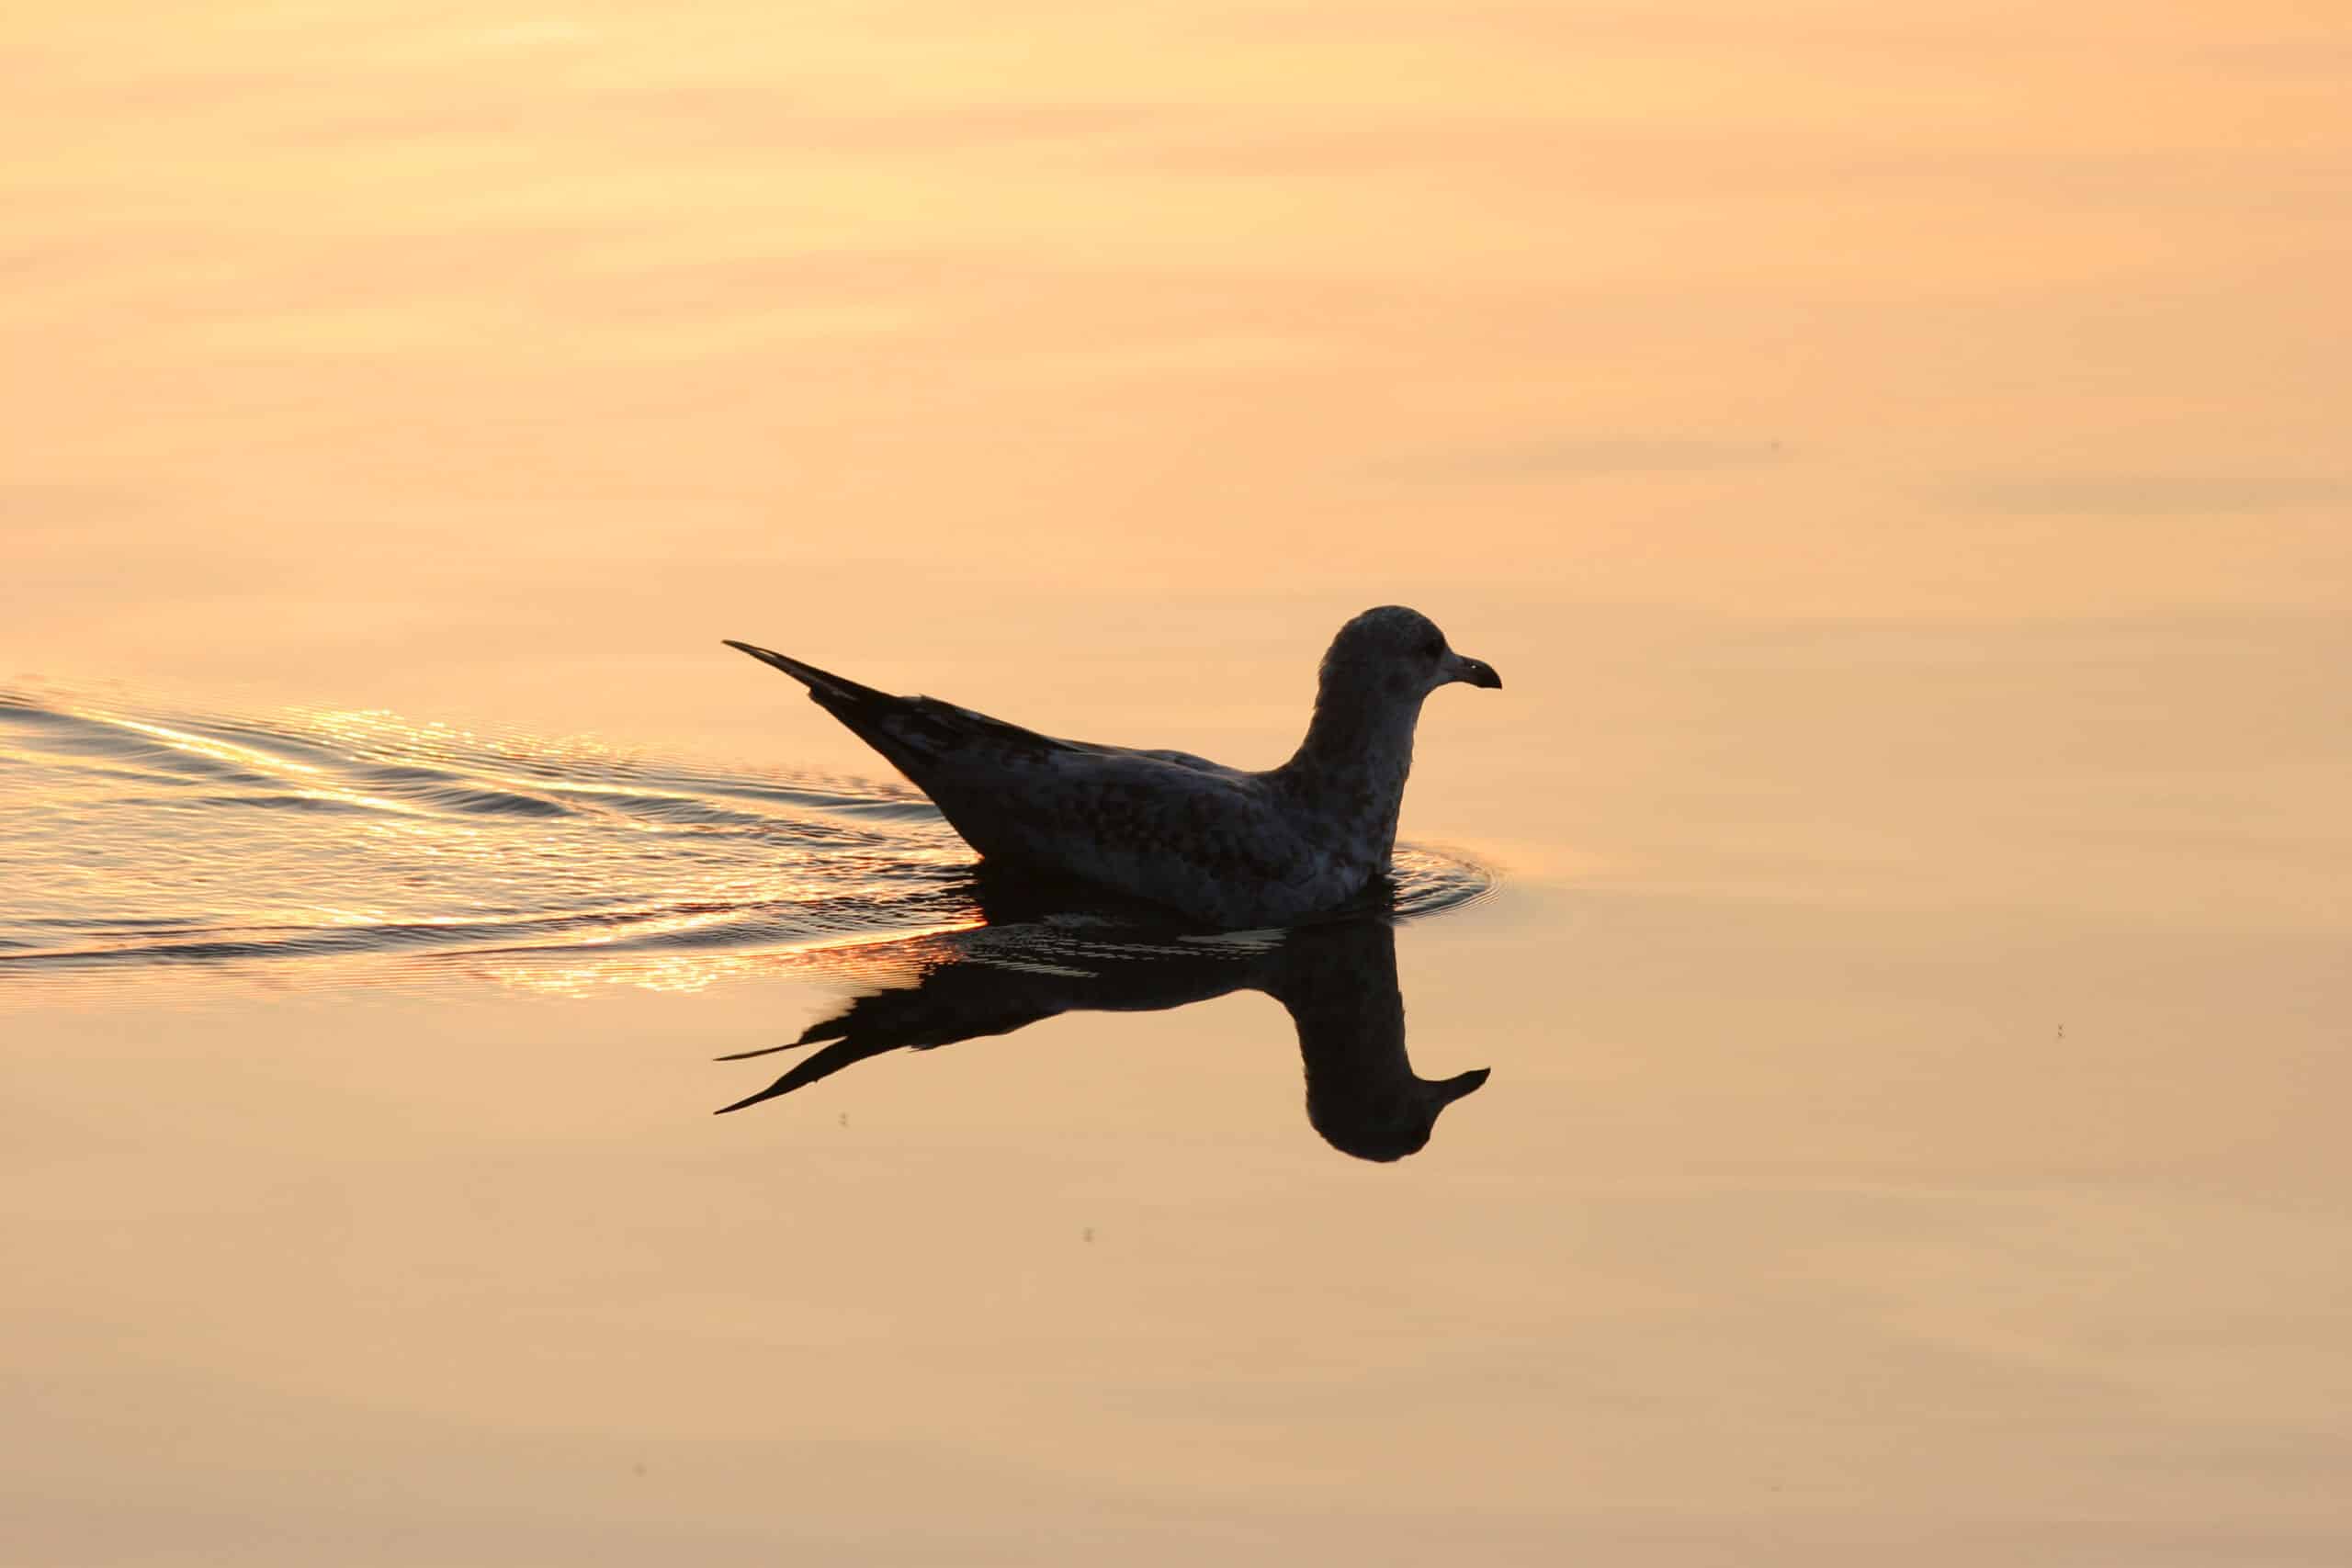 A seagull swimming on a lake at sunset.